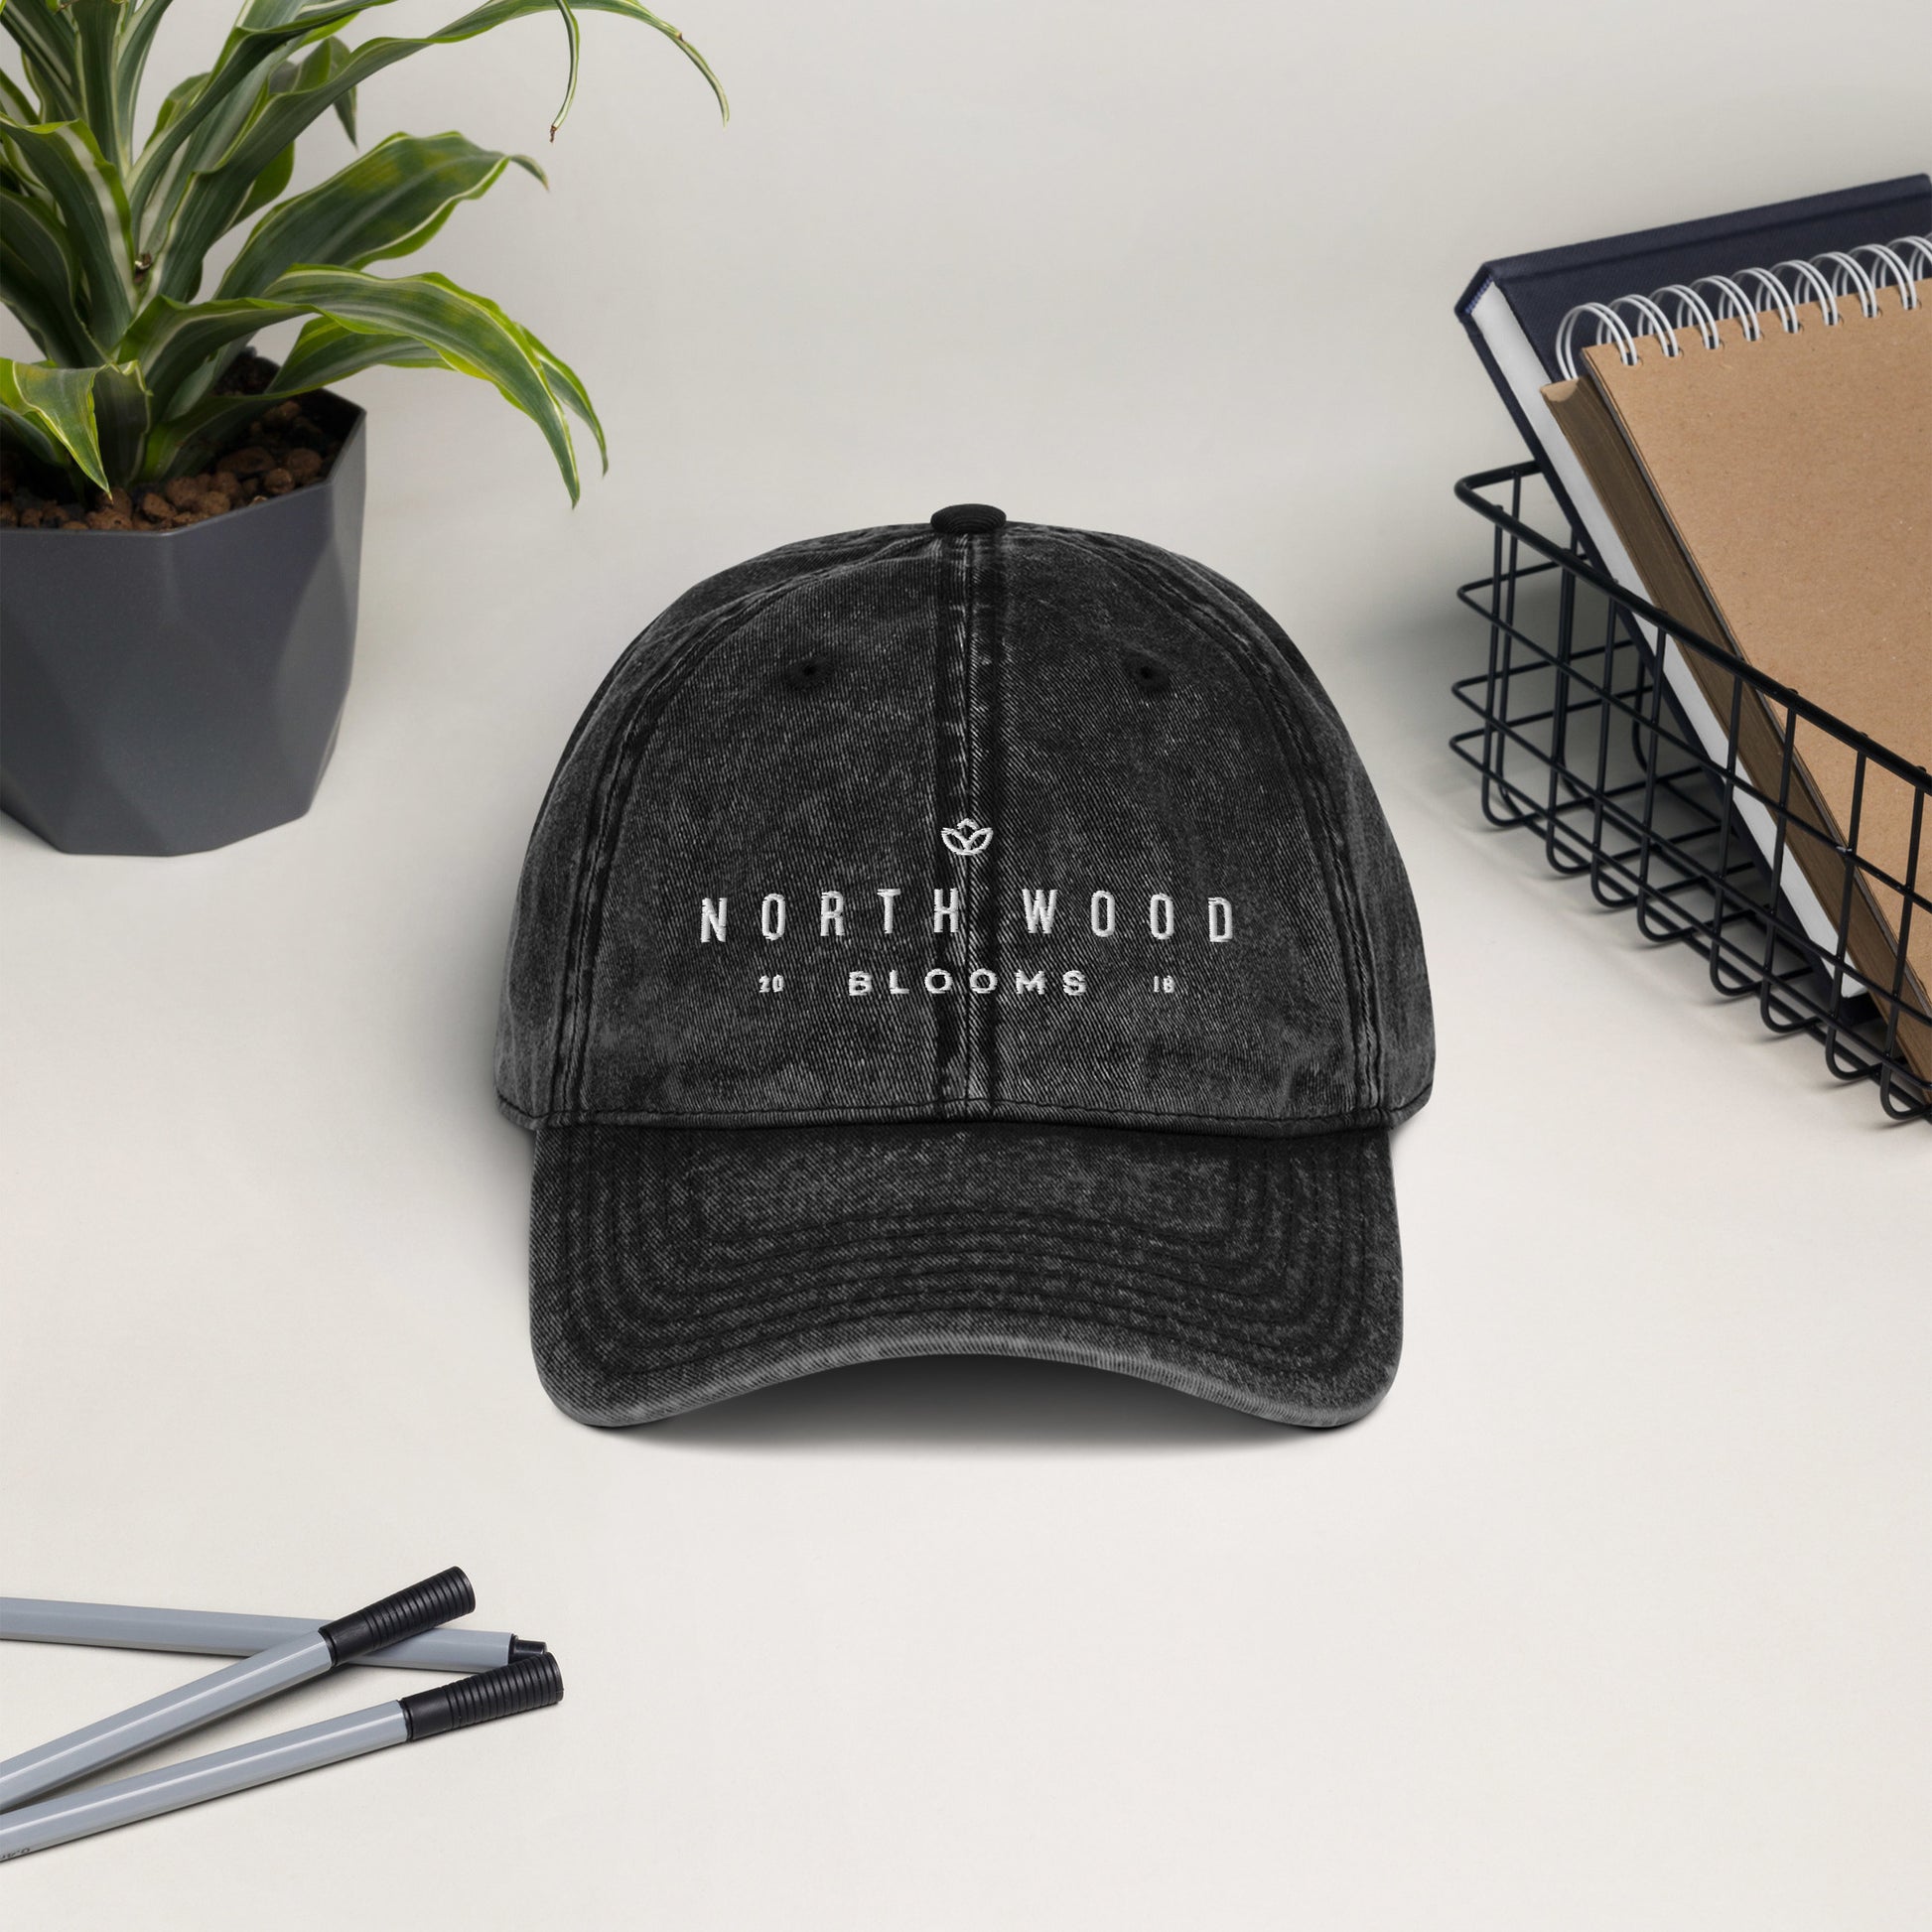 Vintage black cap with "North Wood Blooms" written in white print. 